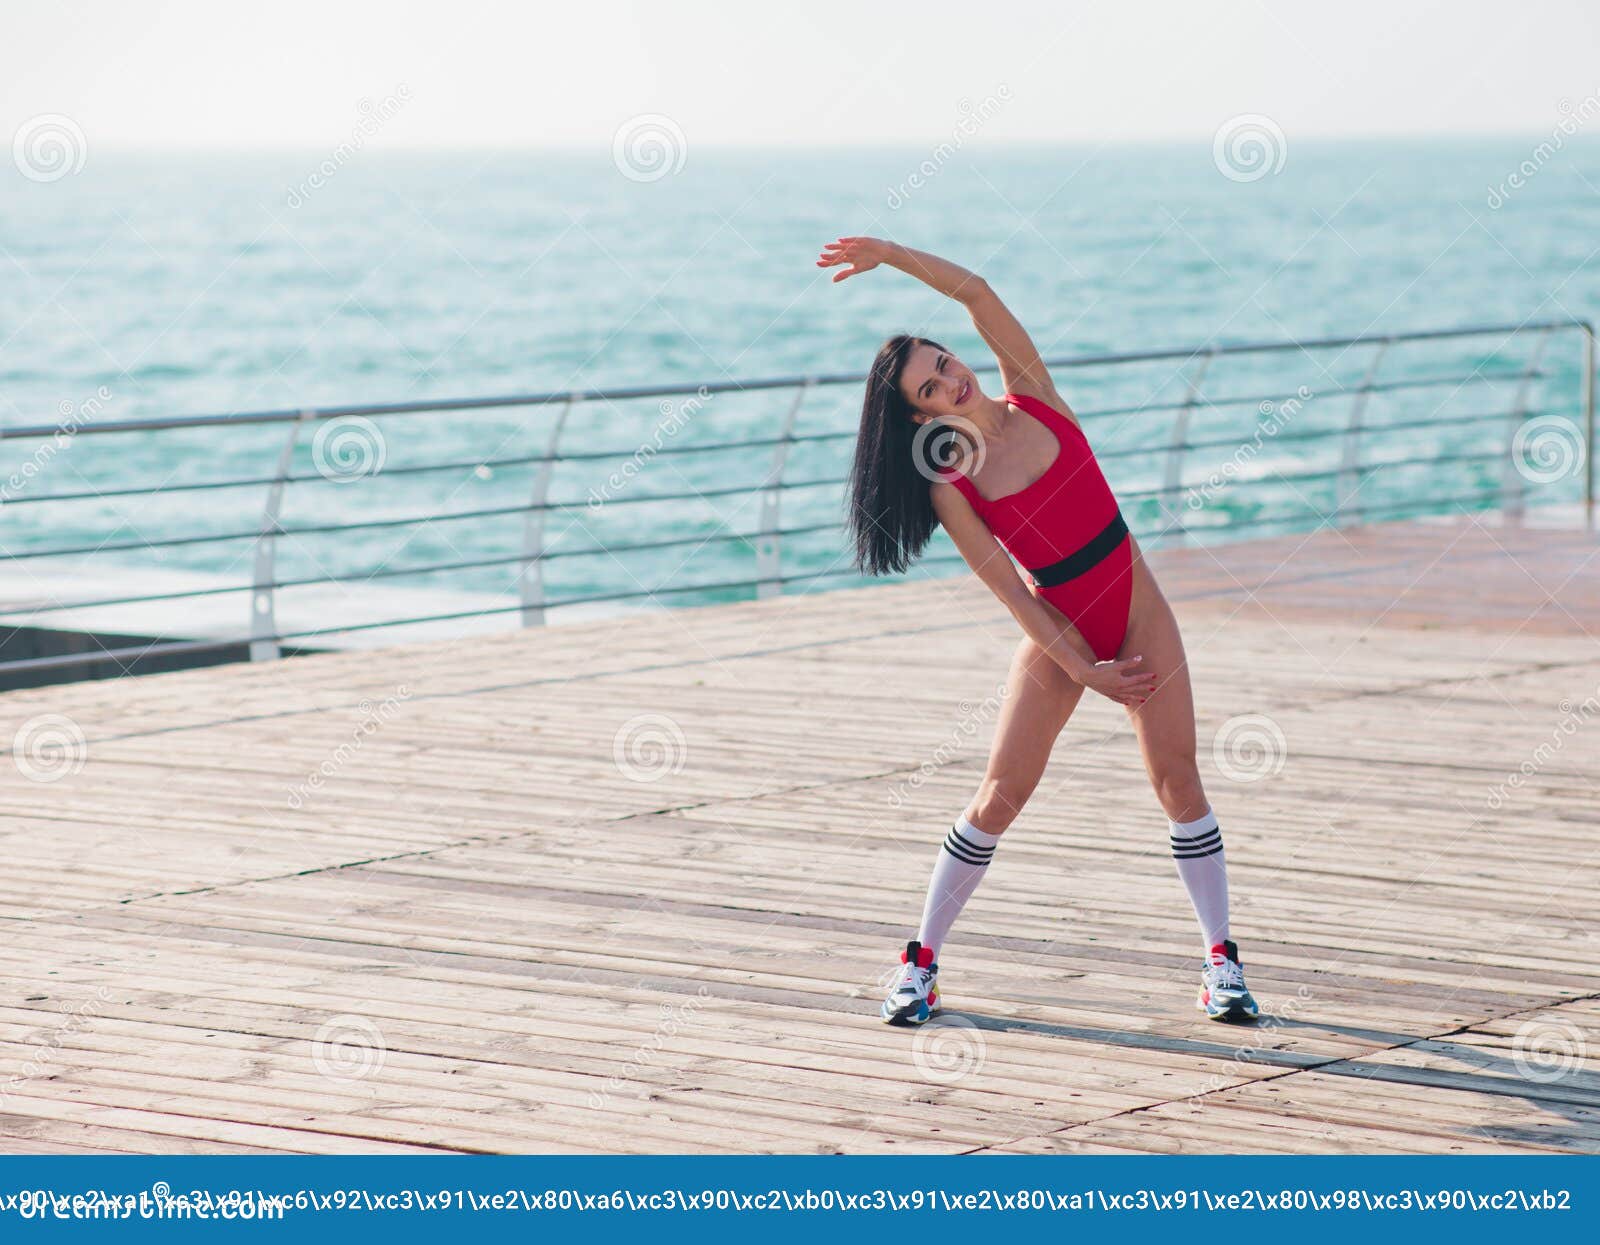 Sport woman stock photo. Image of ocean, nature, fitness -